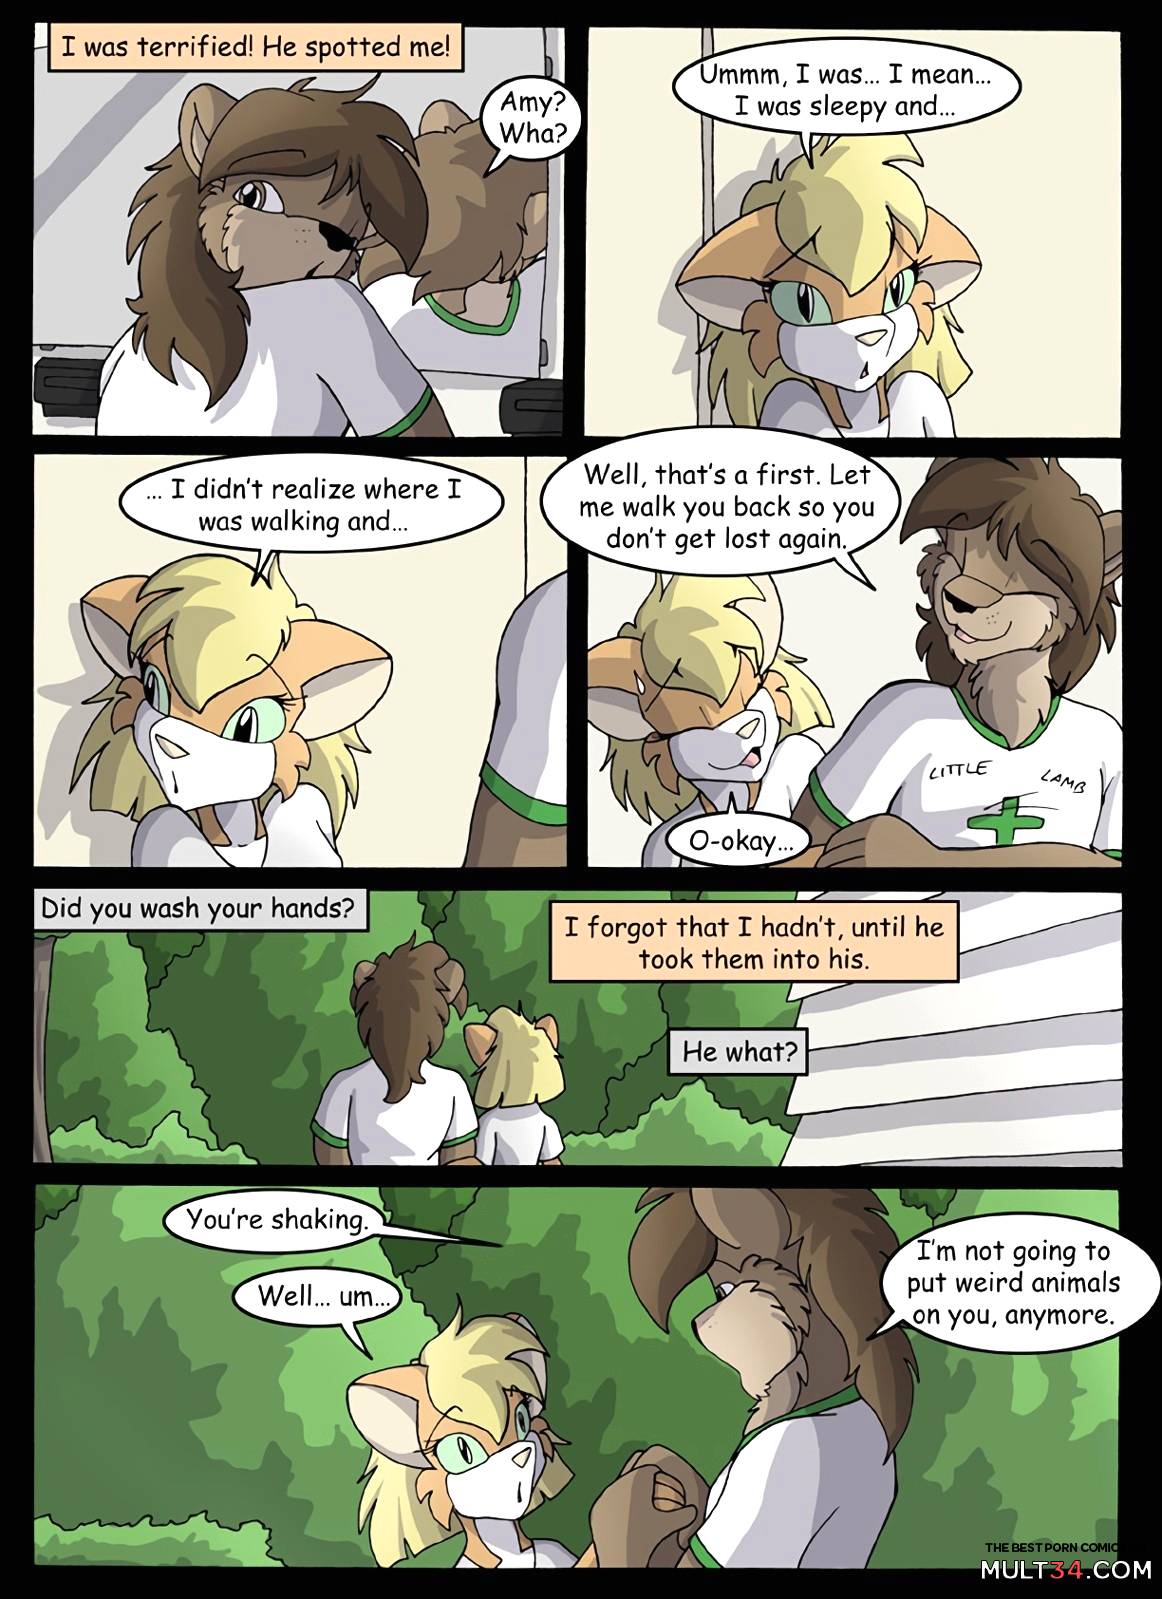 Amy's Little Lamb, Summer Camp Adventure page 11